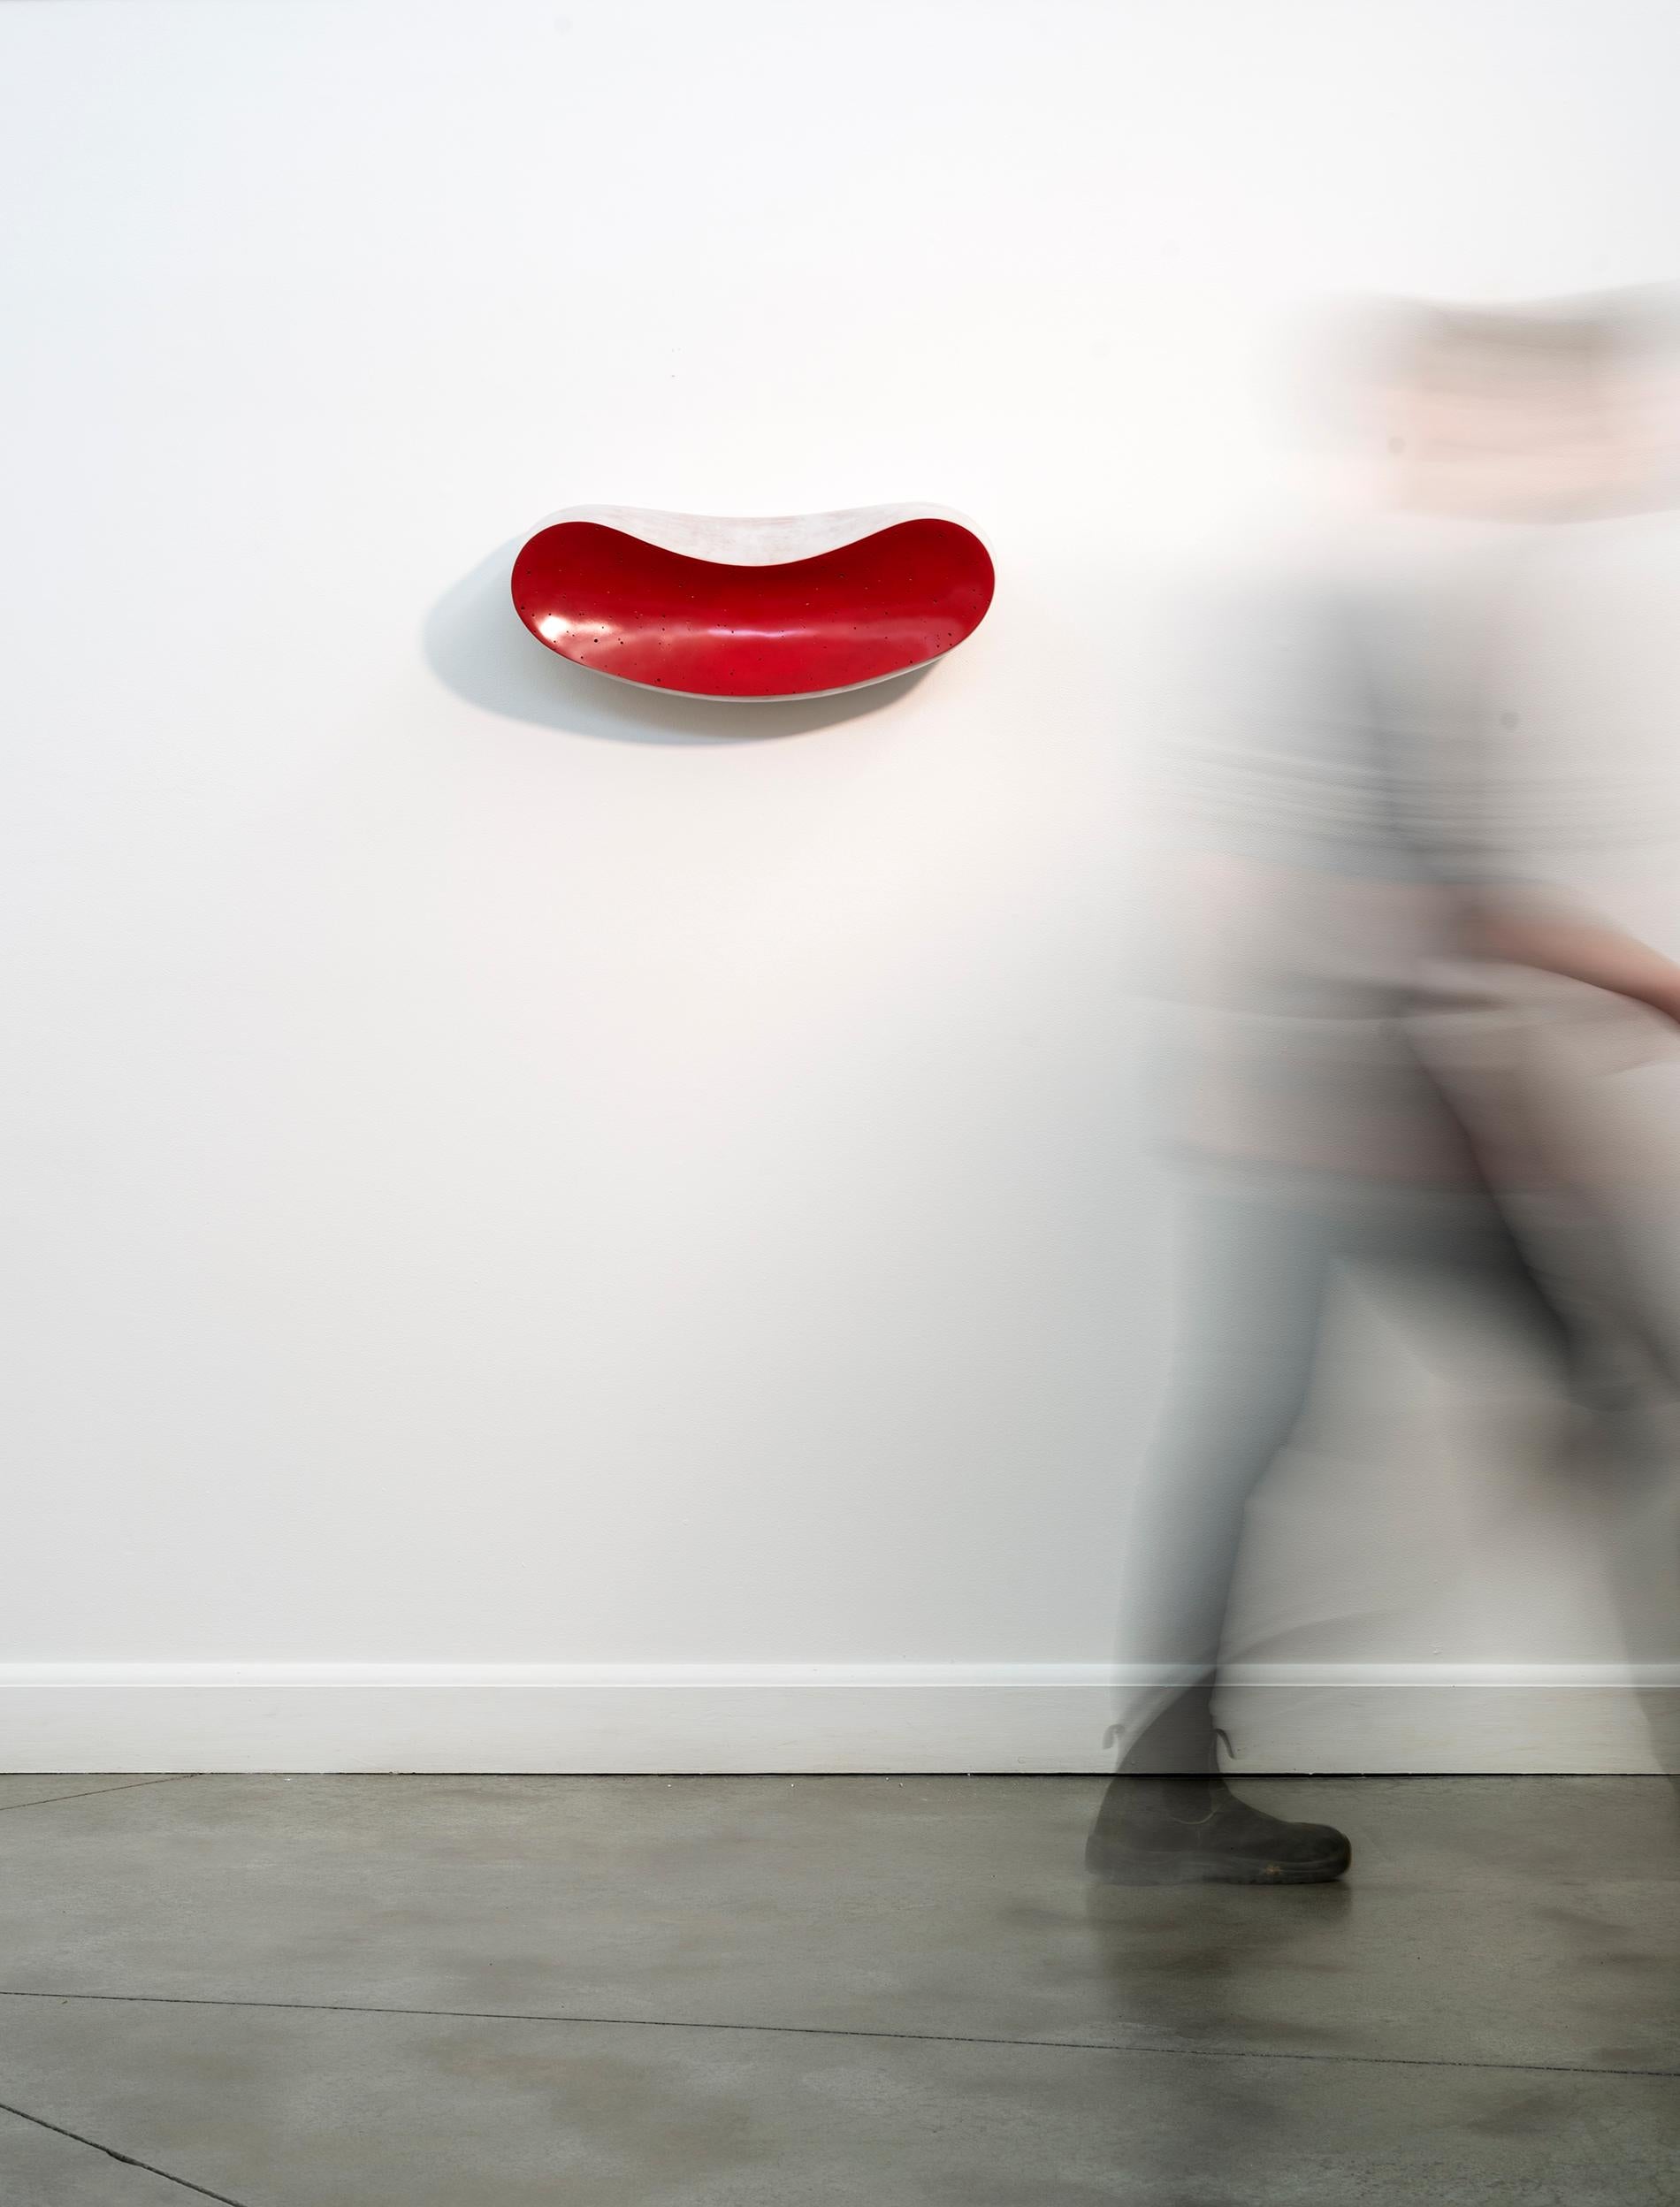 La Bouche - playful, red, white, abstract, elongated, ceramic wall sculpture - Abstract Sculpture by Steven Heinemann